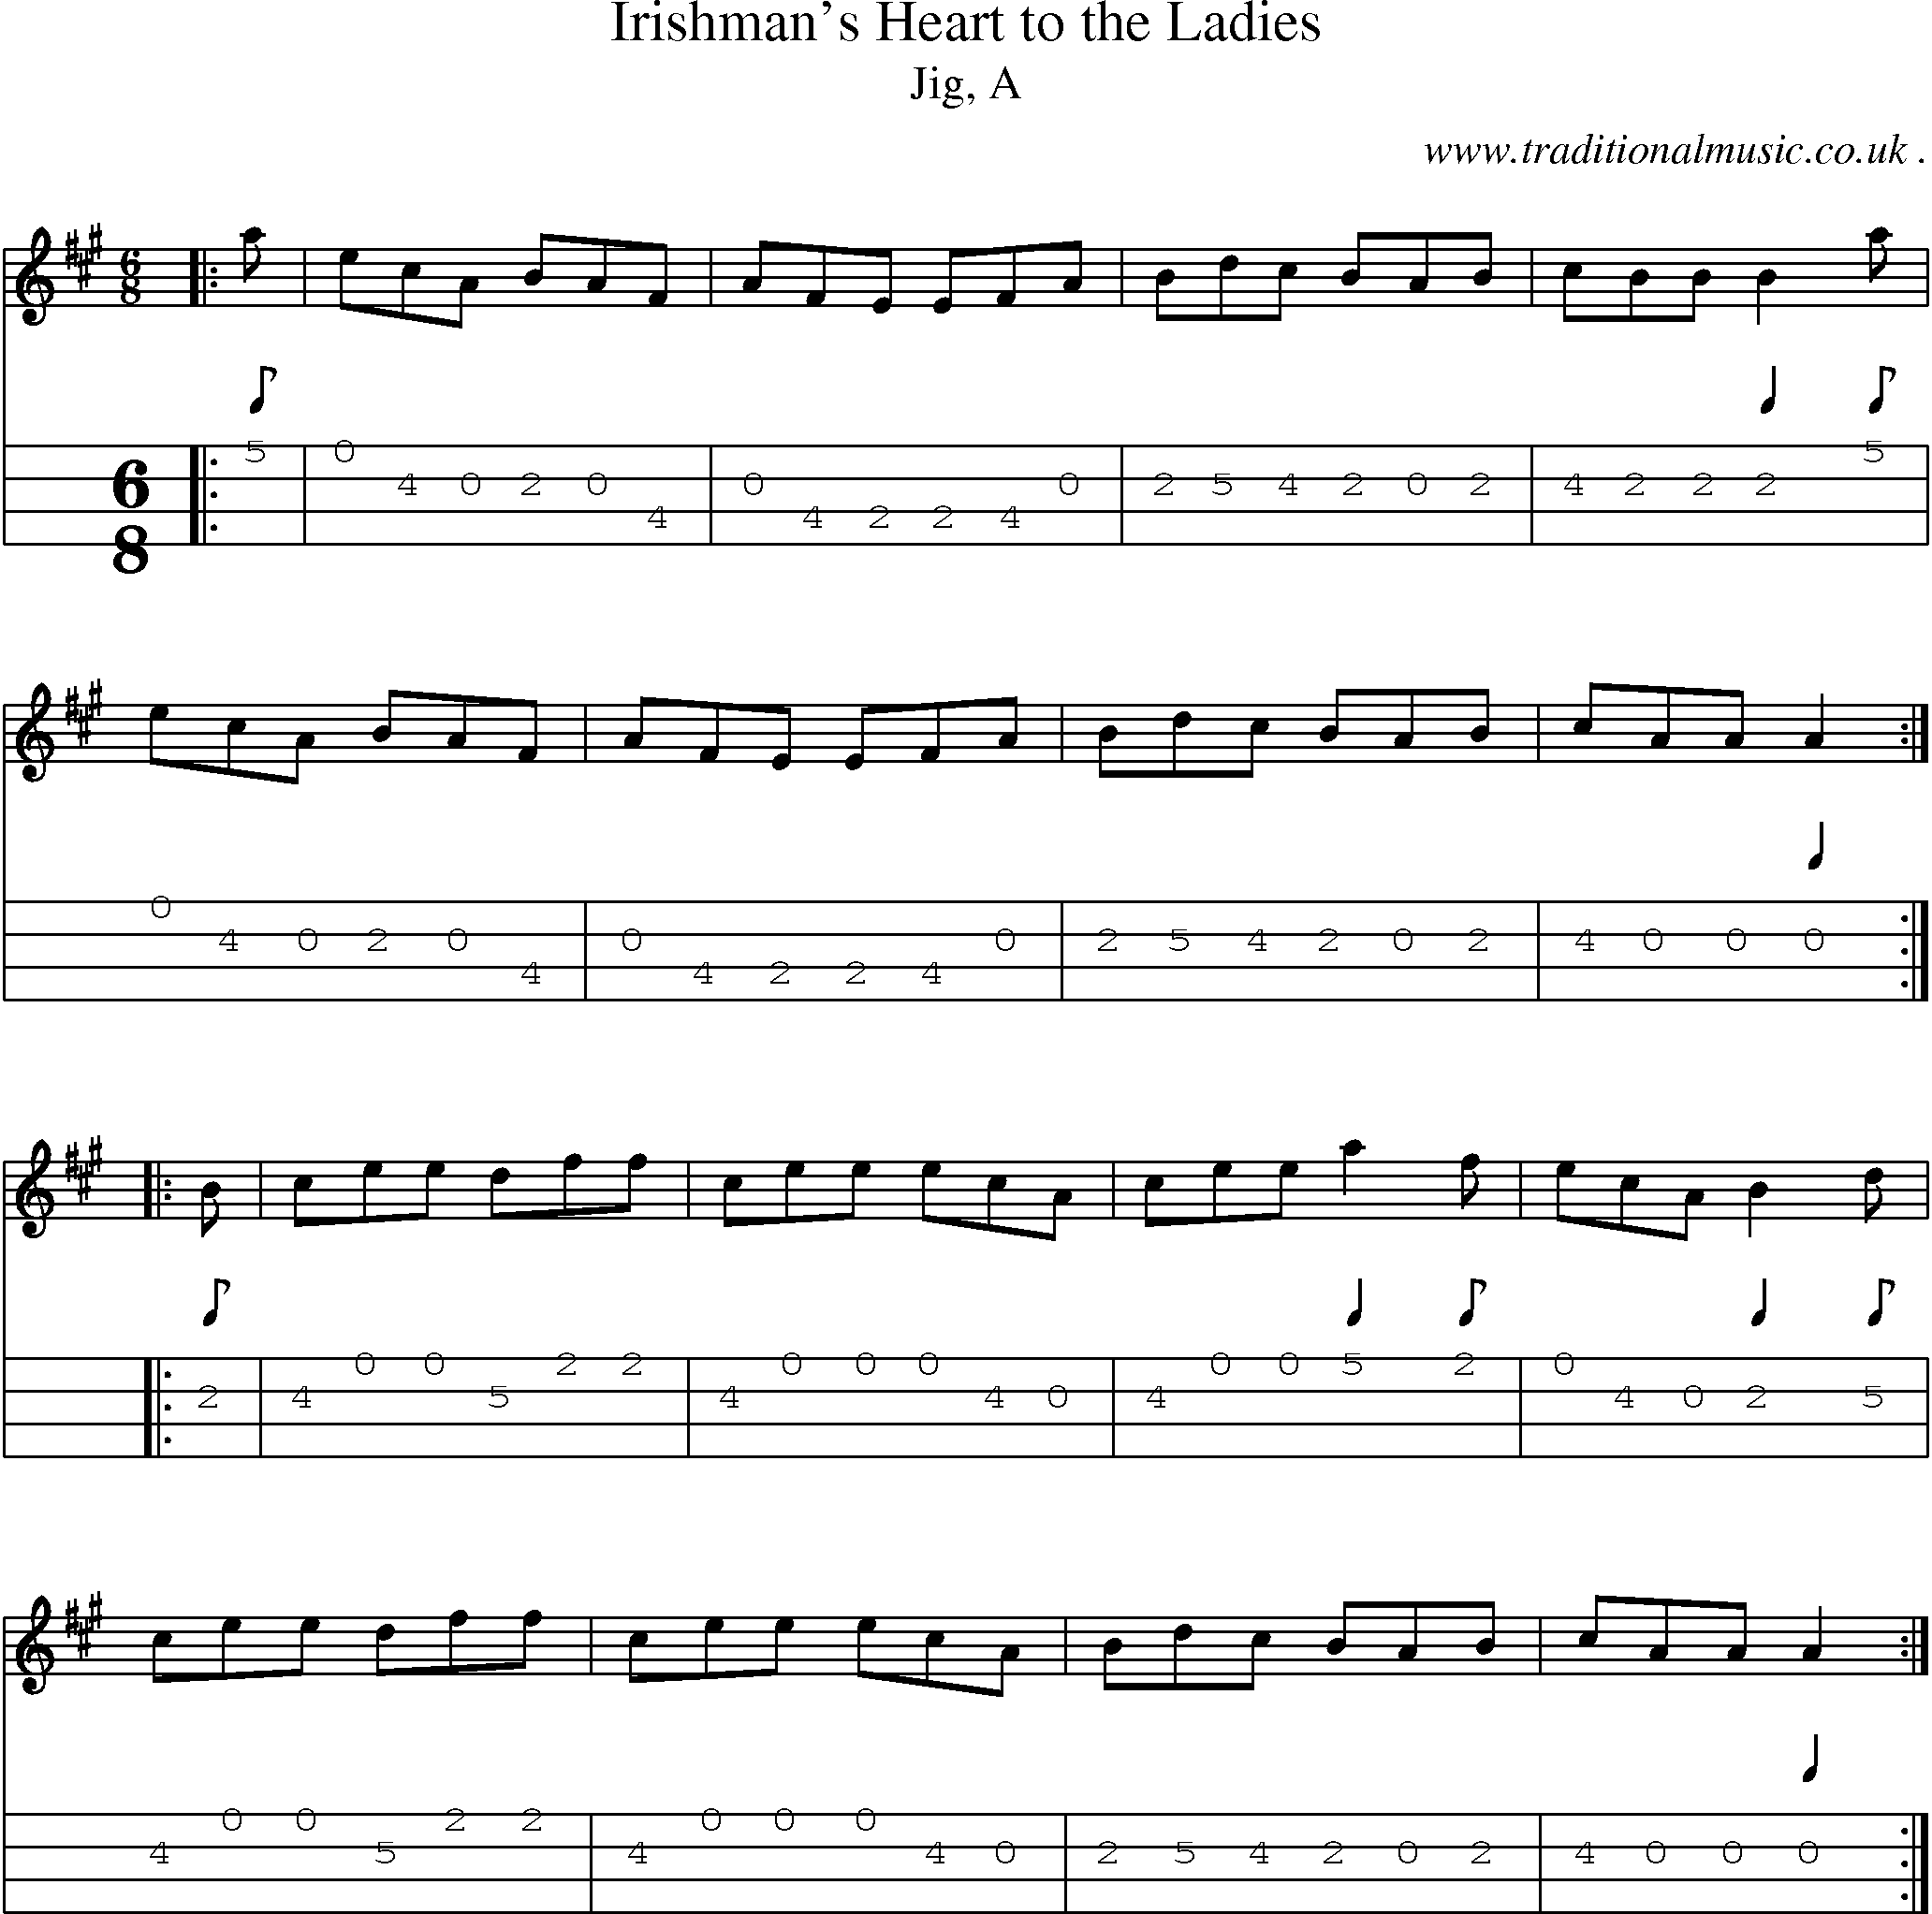 Sheet-music  score, Chords and Mandolin Tabs for Irishmans Heart To The Ladies